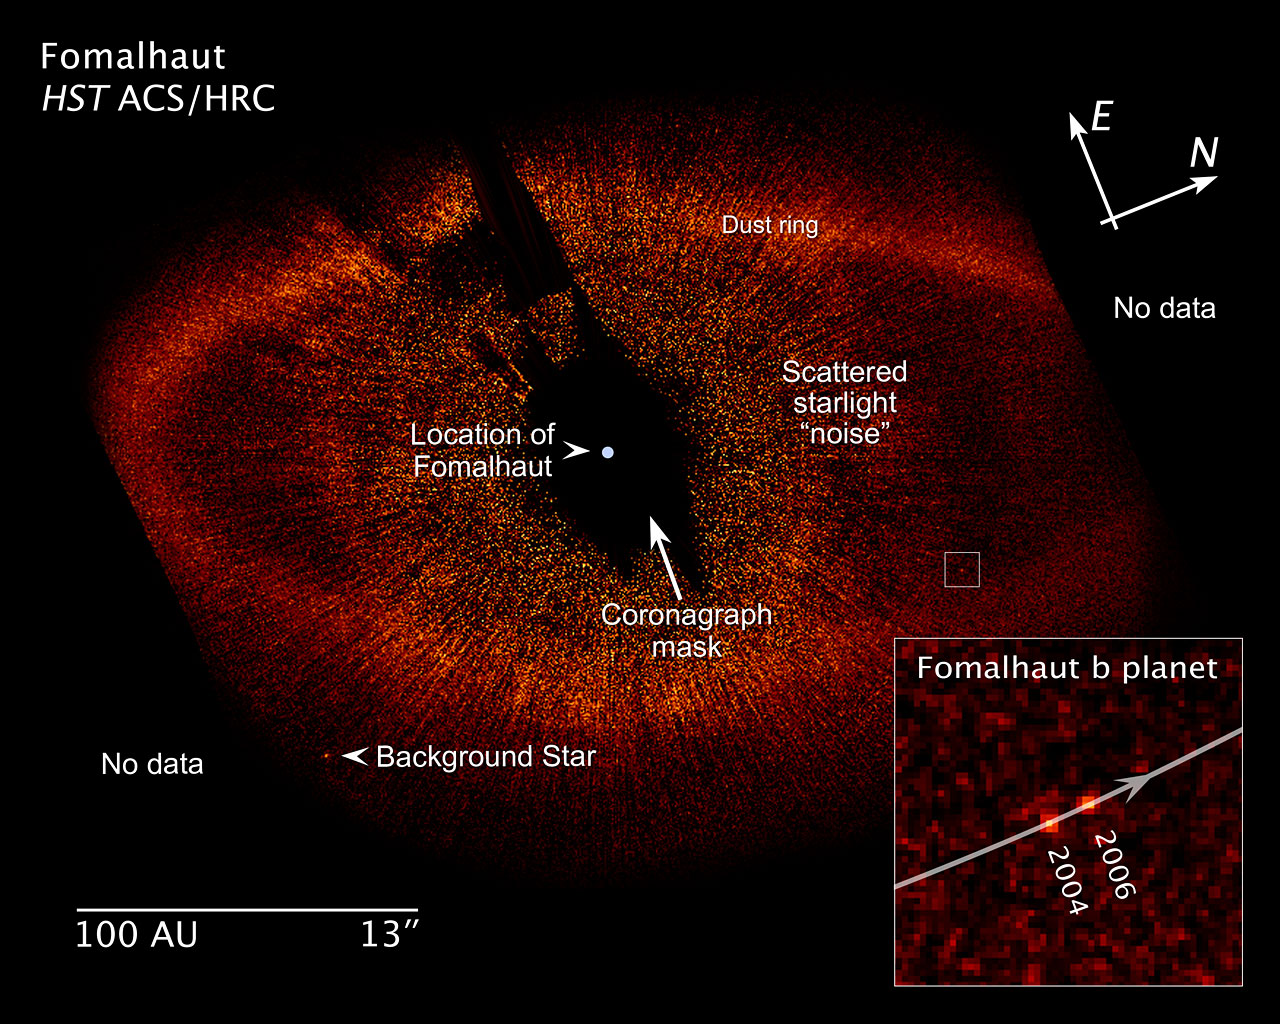 In 2012, Hubble Space Telescope observations seemed to confirm the existence of Fomalhaut b, but since then, the exoplanet hypothesis has fallen out of favour. Image Credit: NASA/HST